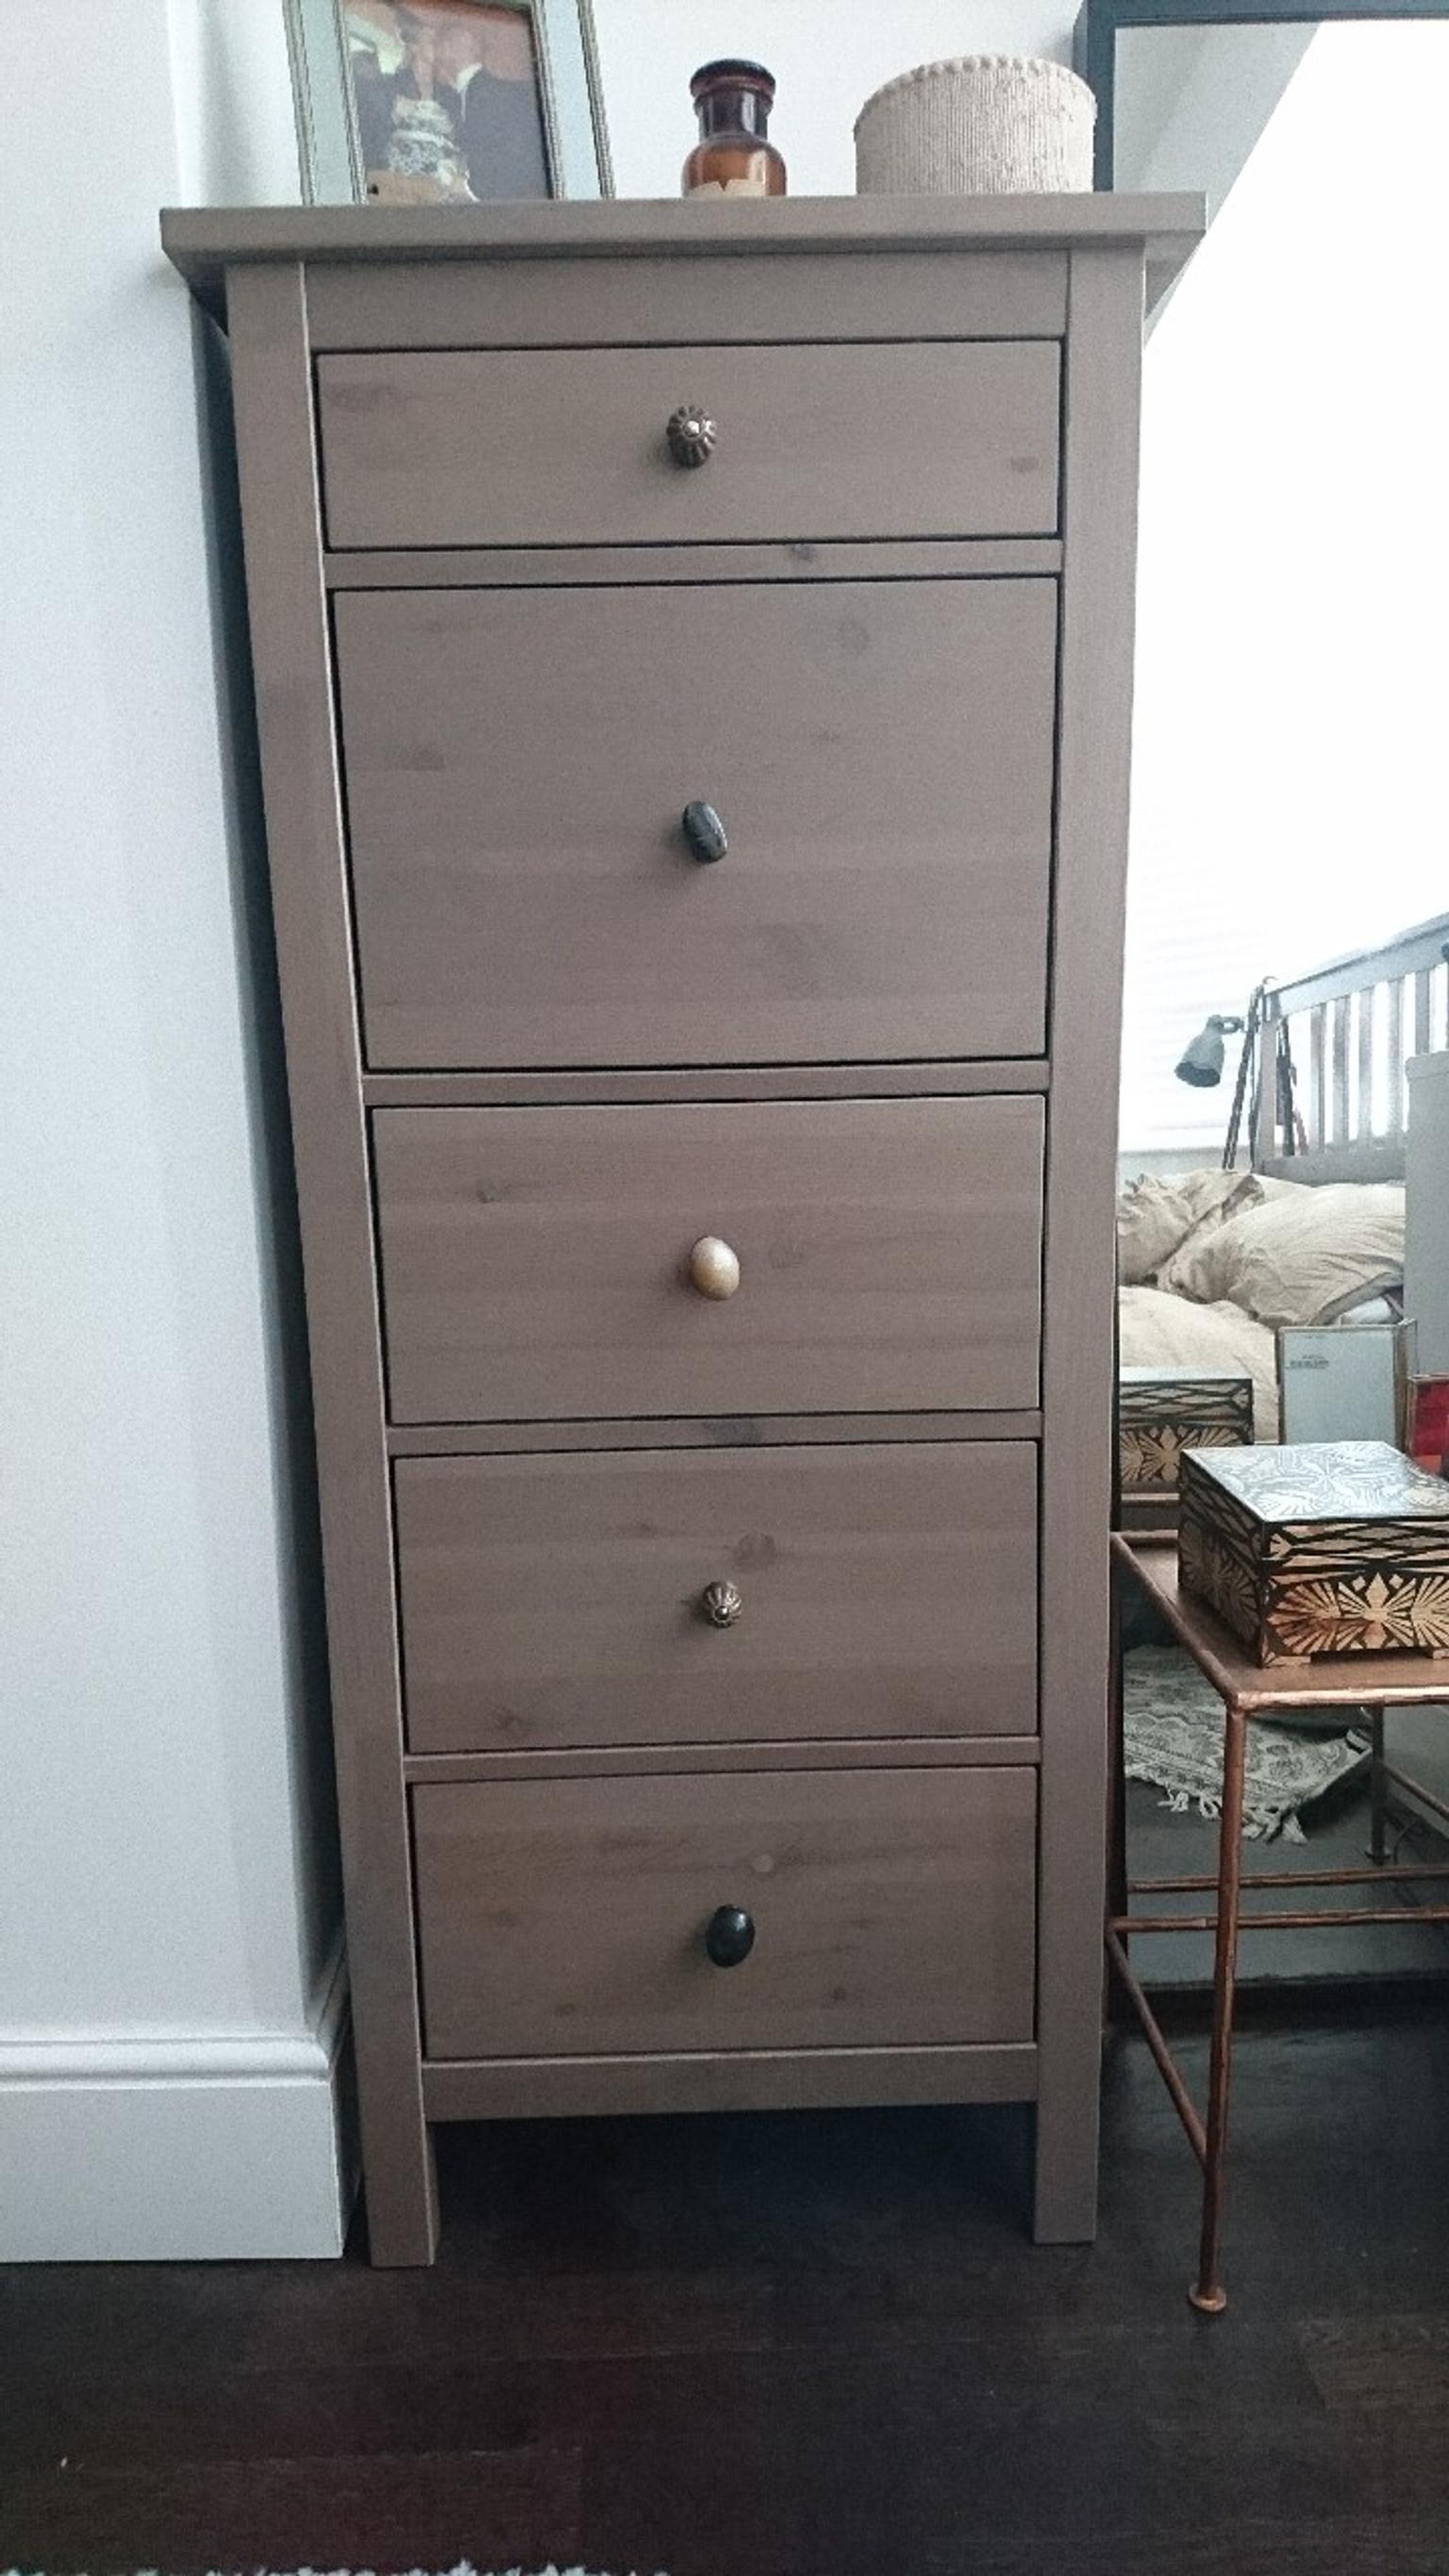 Ikea Hemnes Tall Drawers In M32 Trafford For 50 00 For Sale Shpock